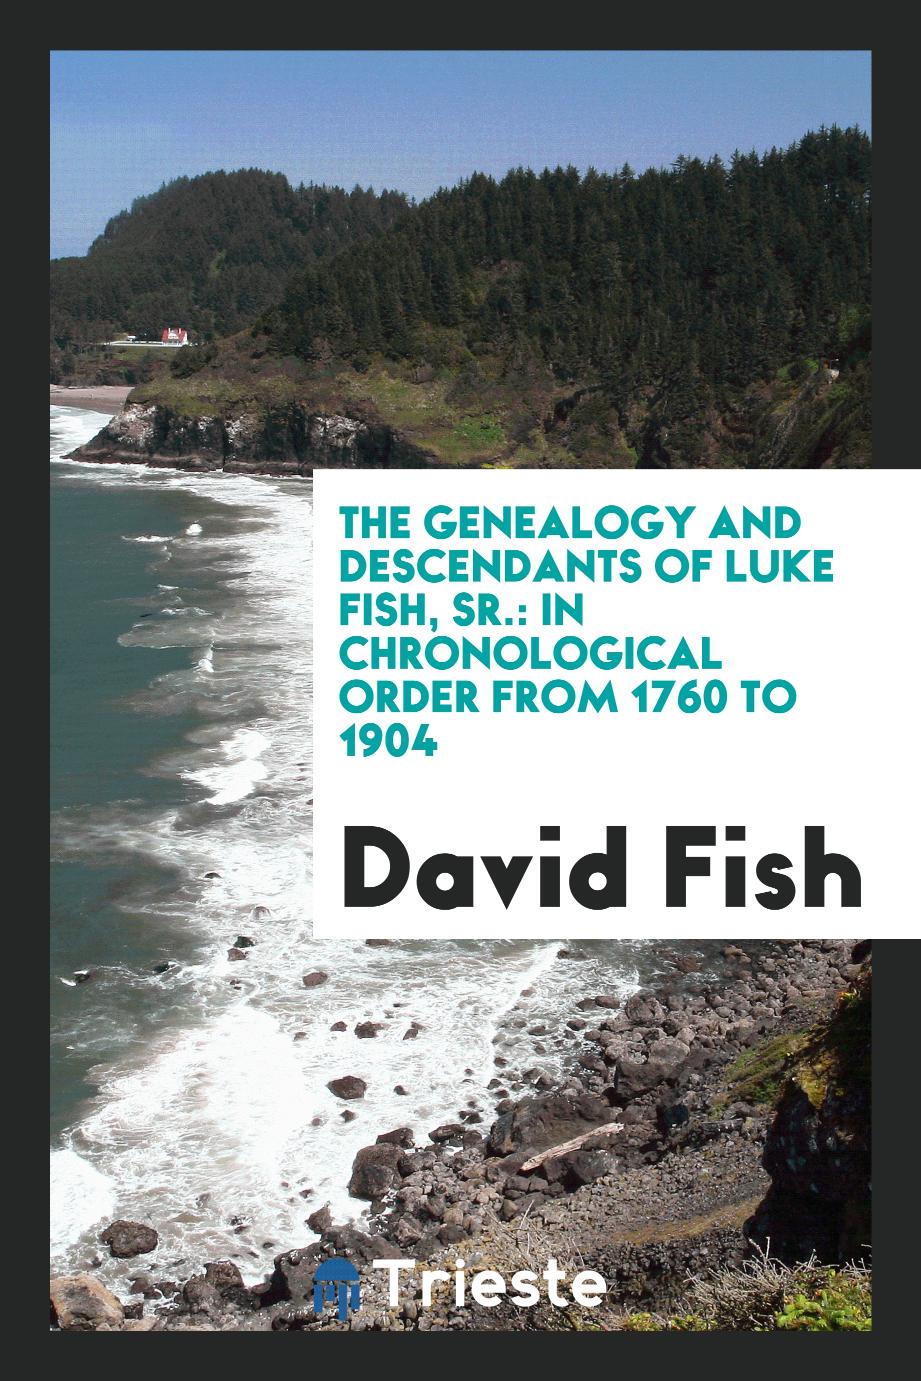 The Genealogy and Descendants of Luke Fish, Sr.: In Chronological Order from 1760 to 1904